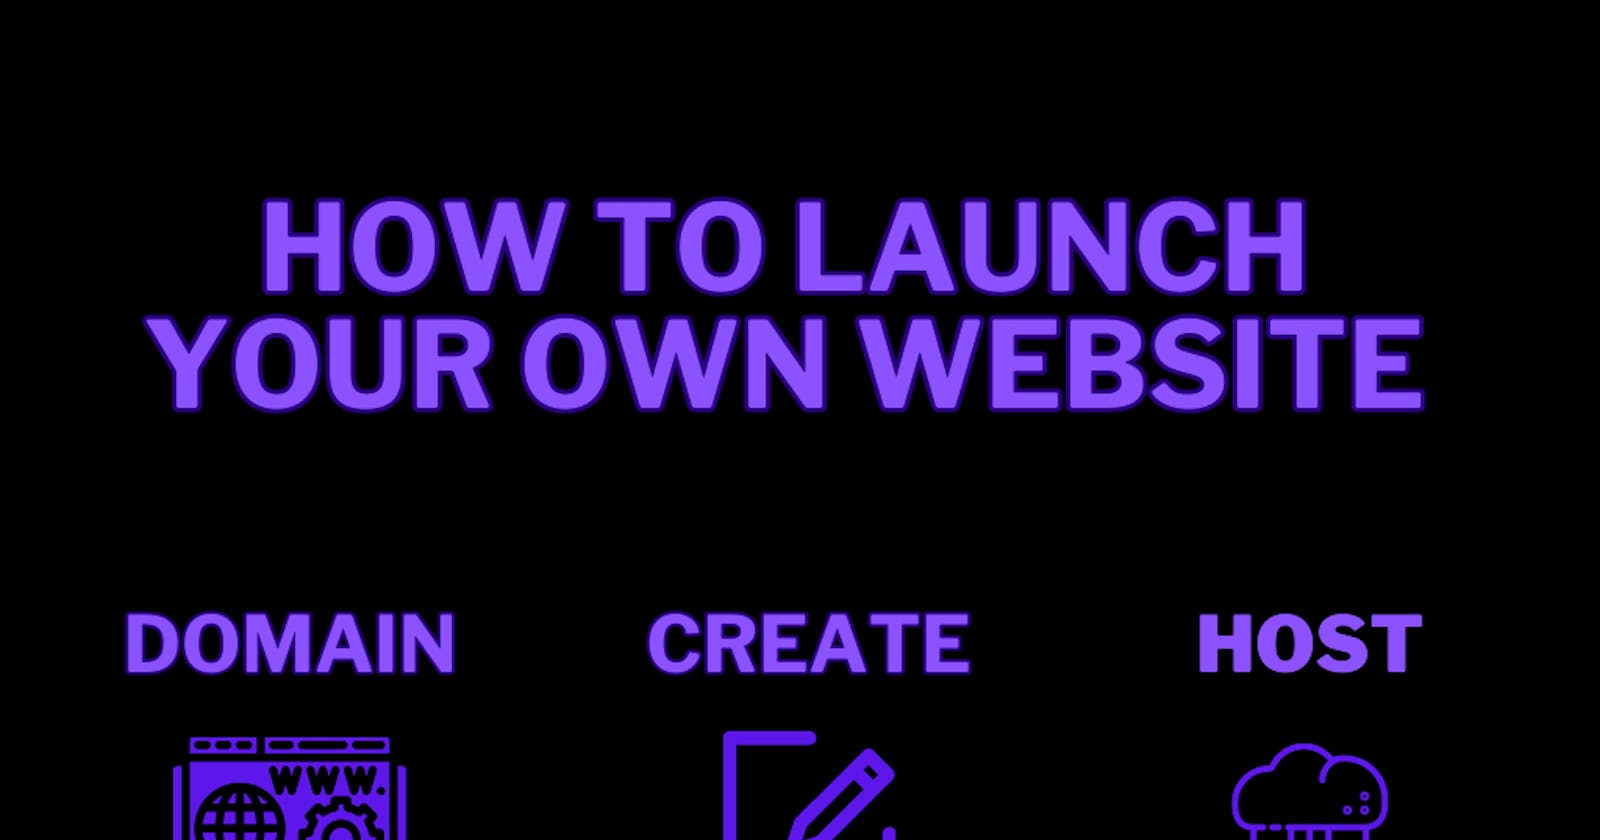 How to launch your own website — a basic guide